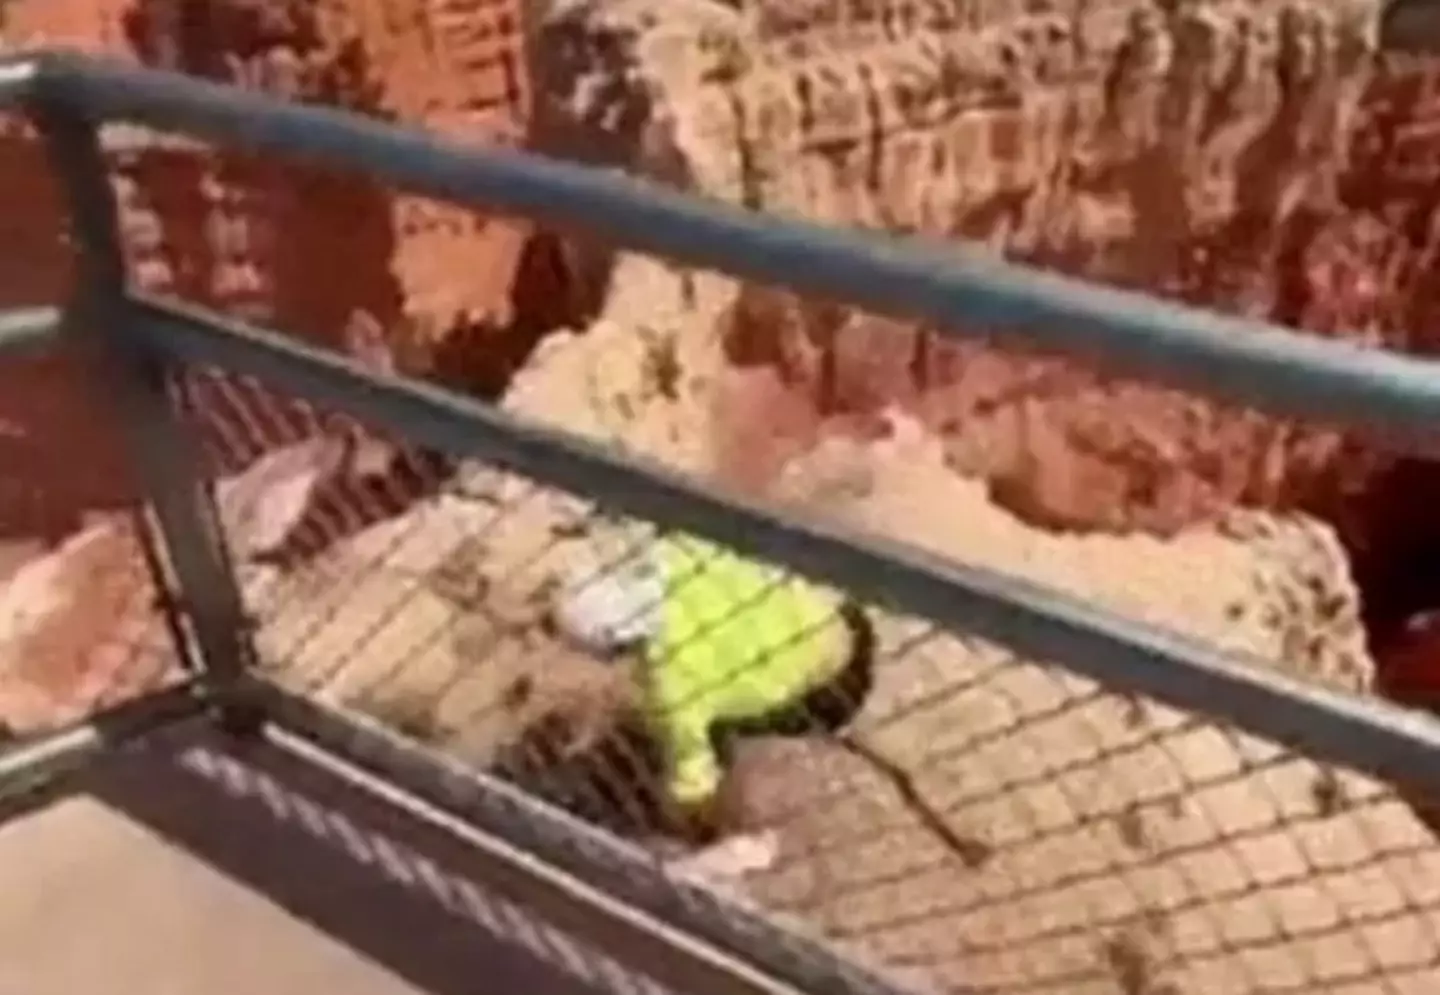 The man nearly fell into the canyon during his stunt.